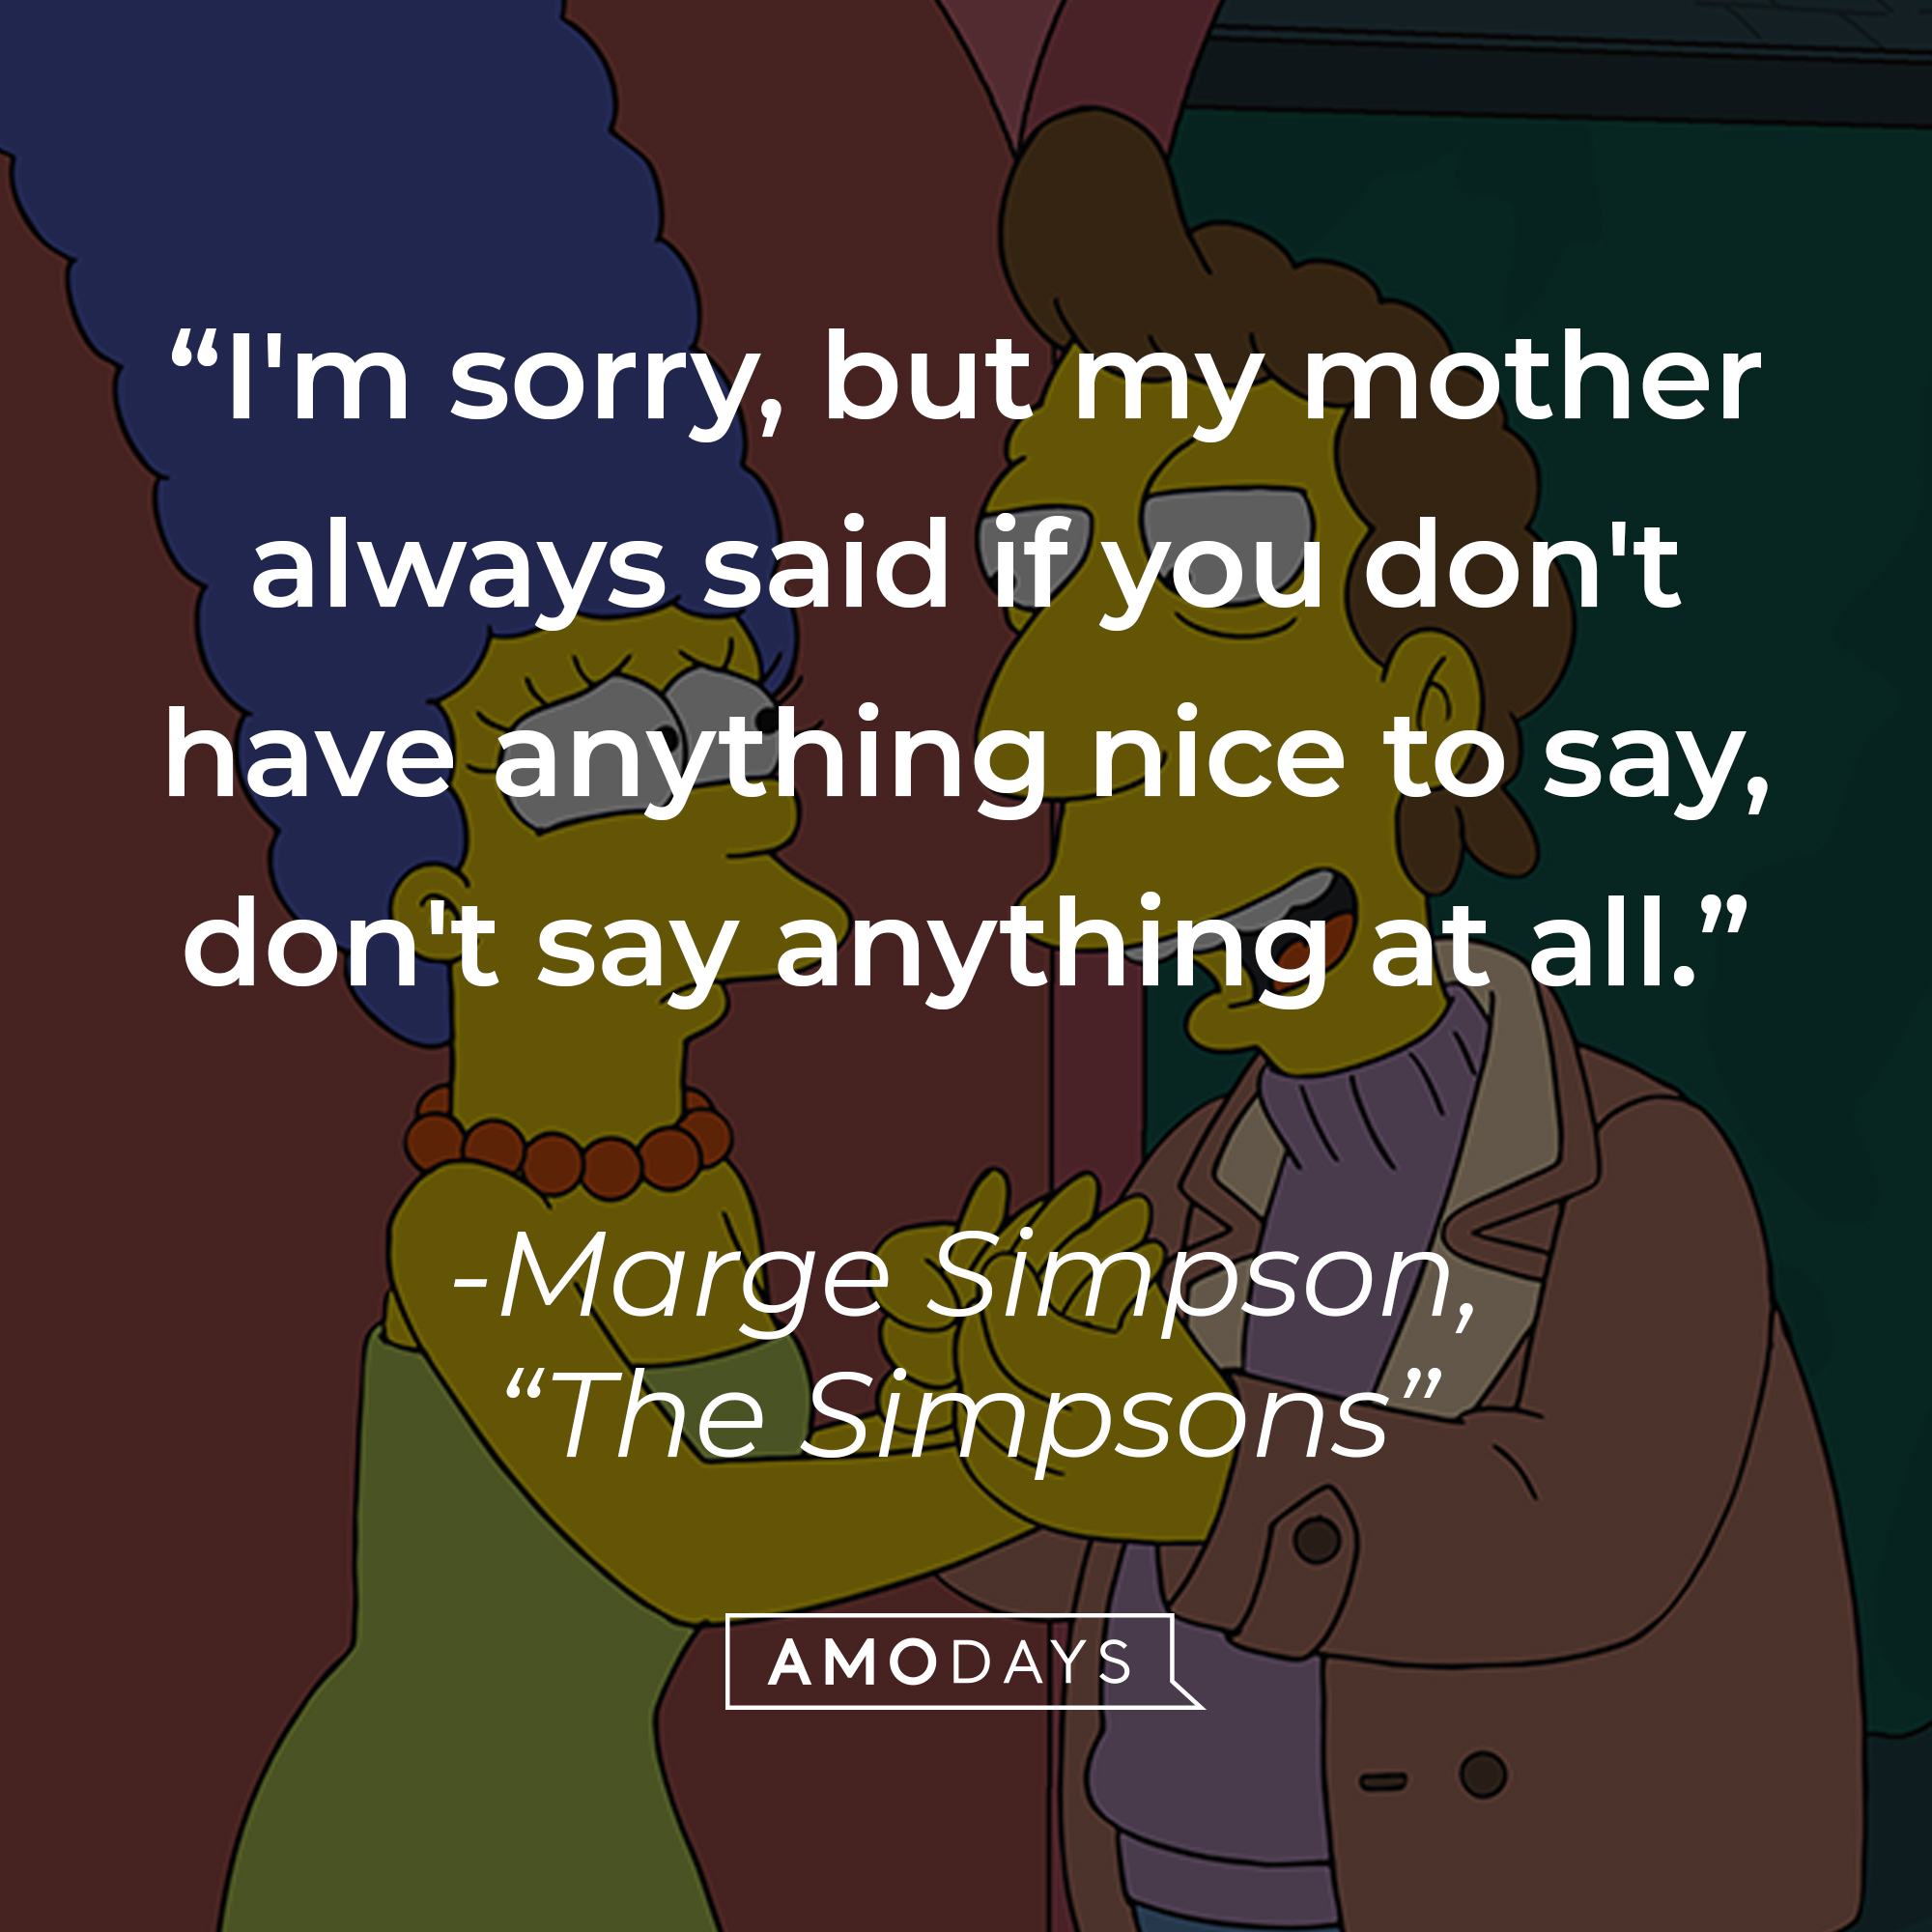 Marge Simpson's quote: "I'm sorry, but my mother always said if you don't have anything nice to say, don't say anything at all." | Image: facebook.com/TheSimpsons